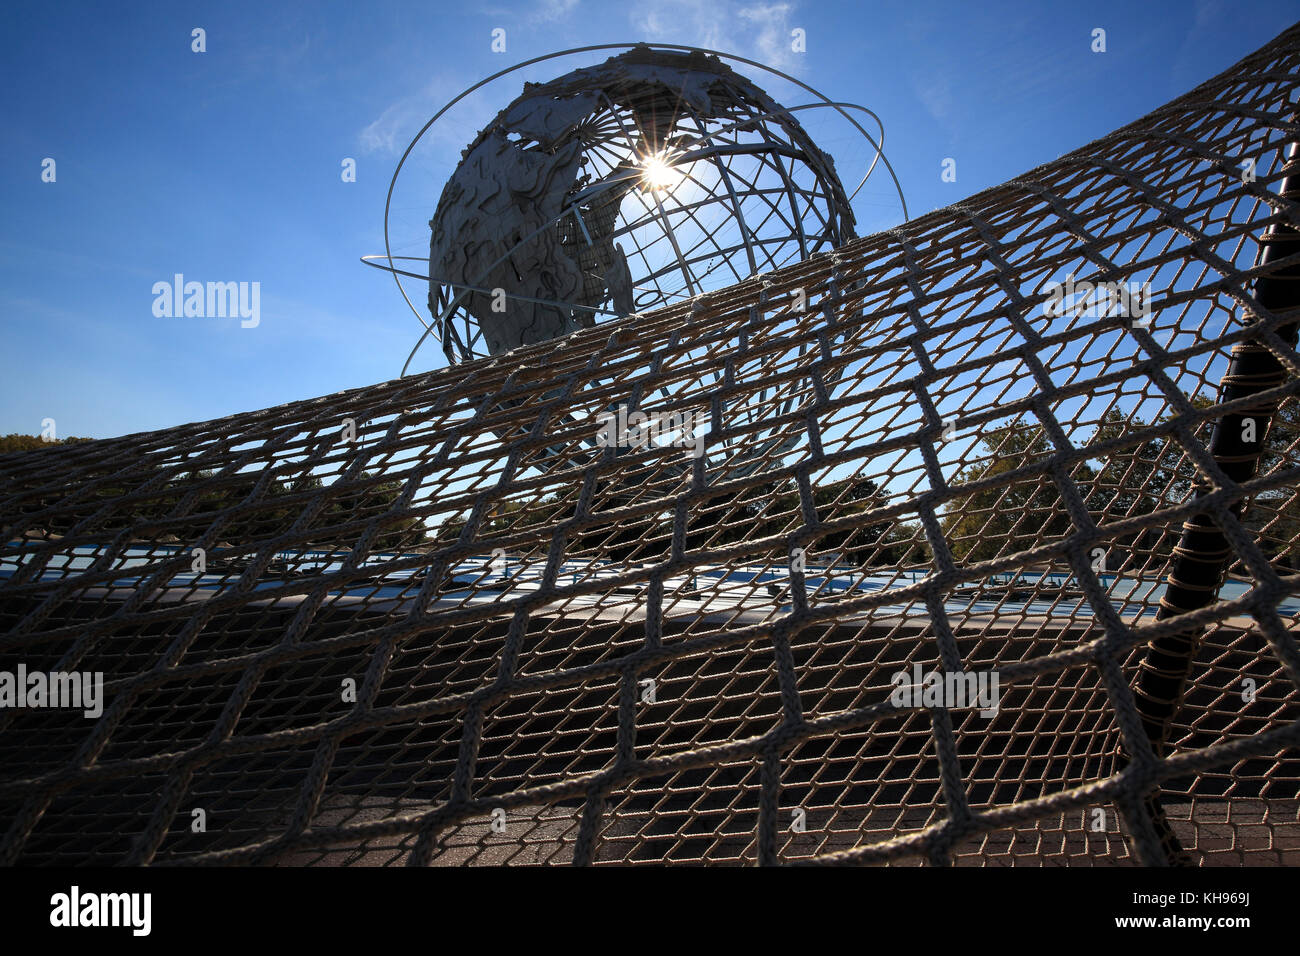 Ai Weiwei's Circle Fence at the Unisphere in Flushing Meadows Corona park, Queens, New York City Stock Photo